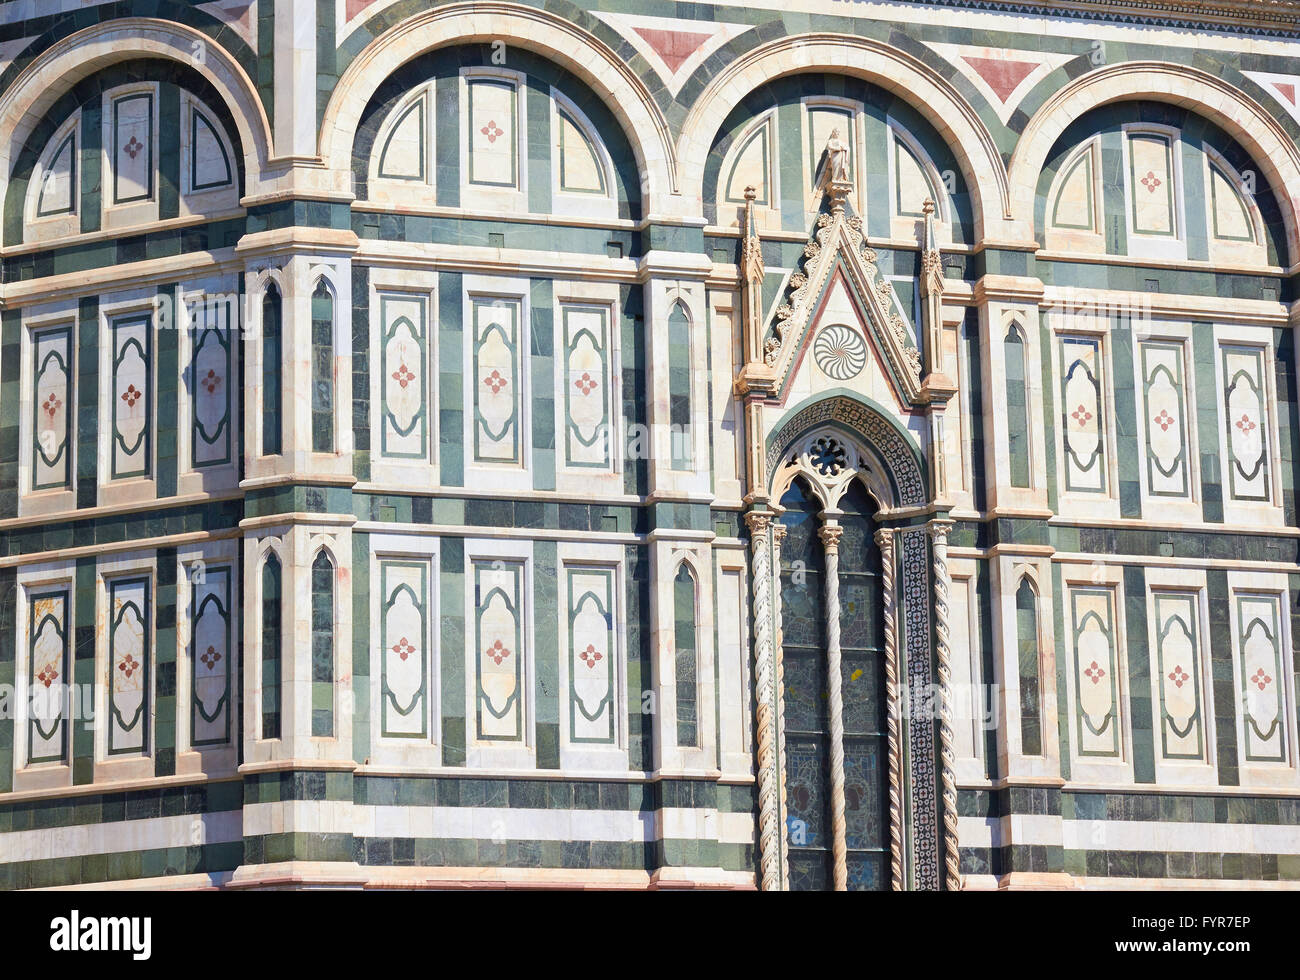 Exterior detail Il Duomo Di Firenze completed in 1436 Florence Tuscany Italy Europe Stock Photo